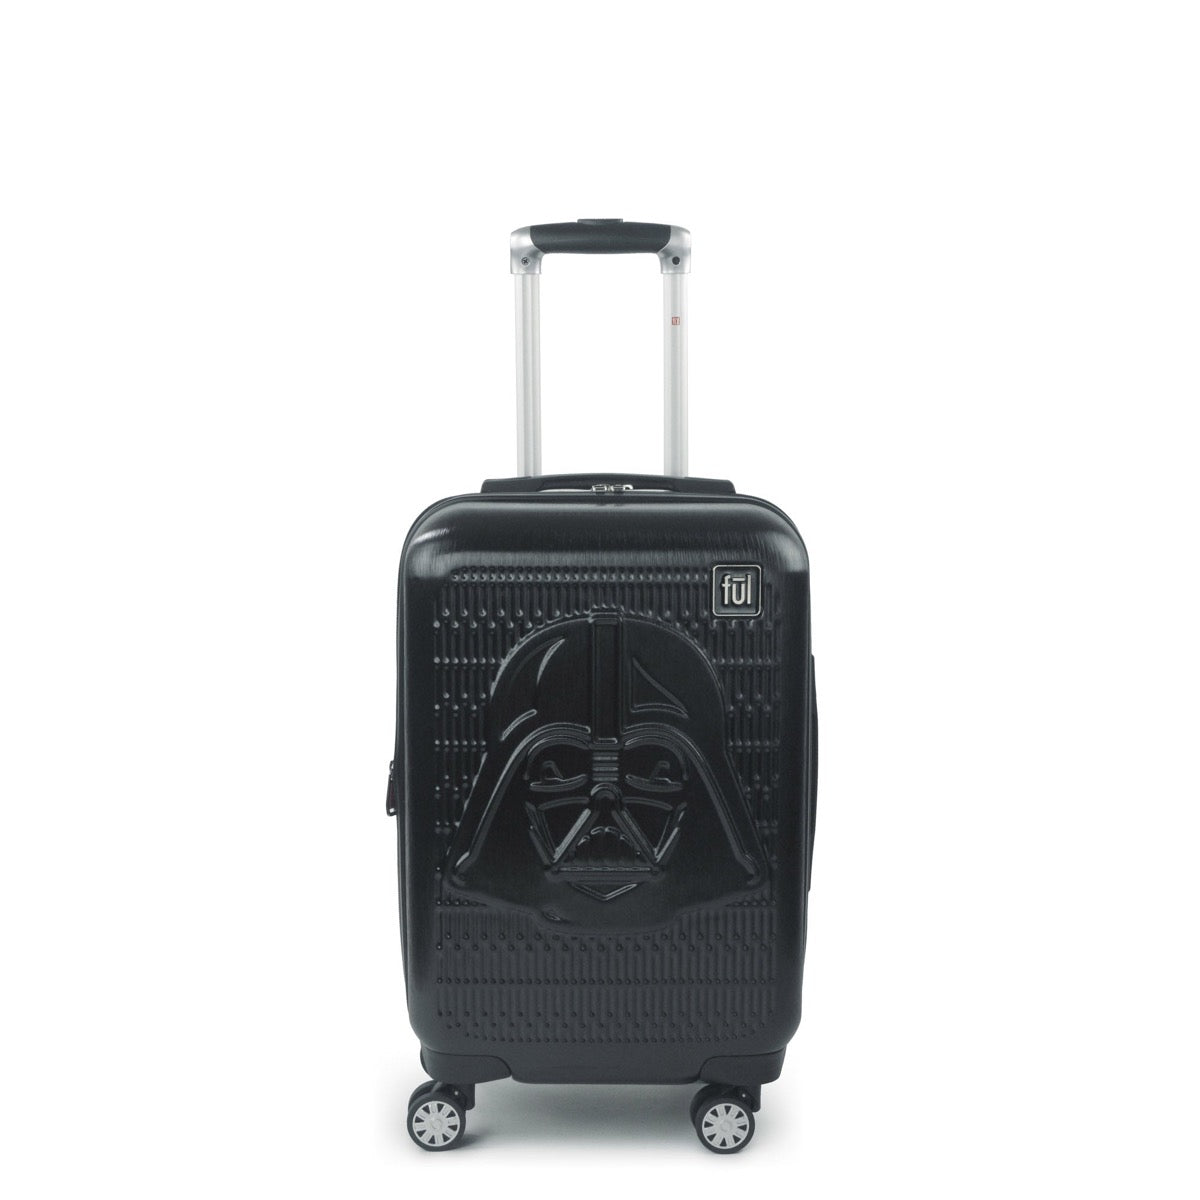 Ful Star Wars Darth Vader 21" carry-on hardsided spinner suitcase in black